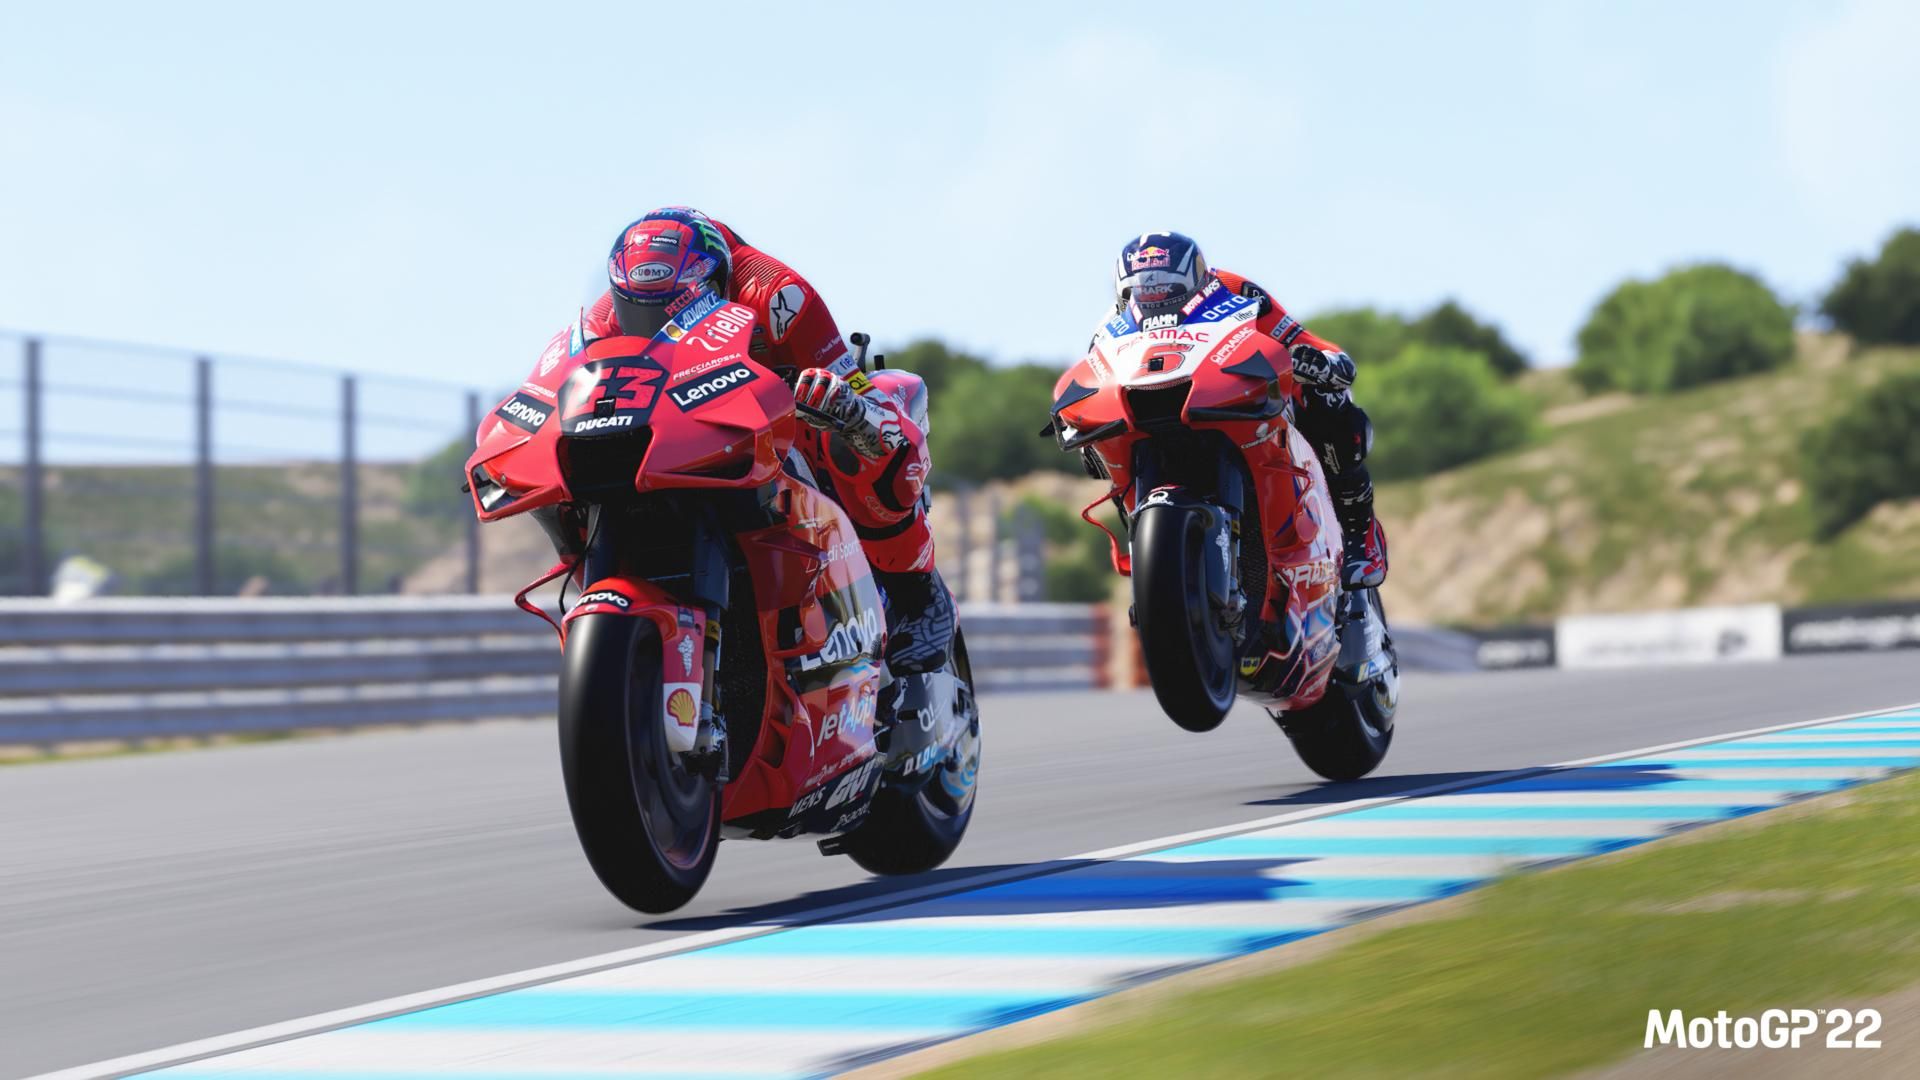 MotoGP 22 release date and time